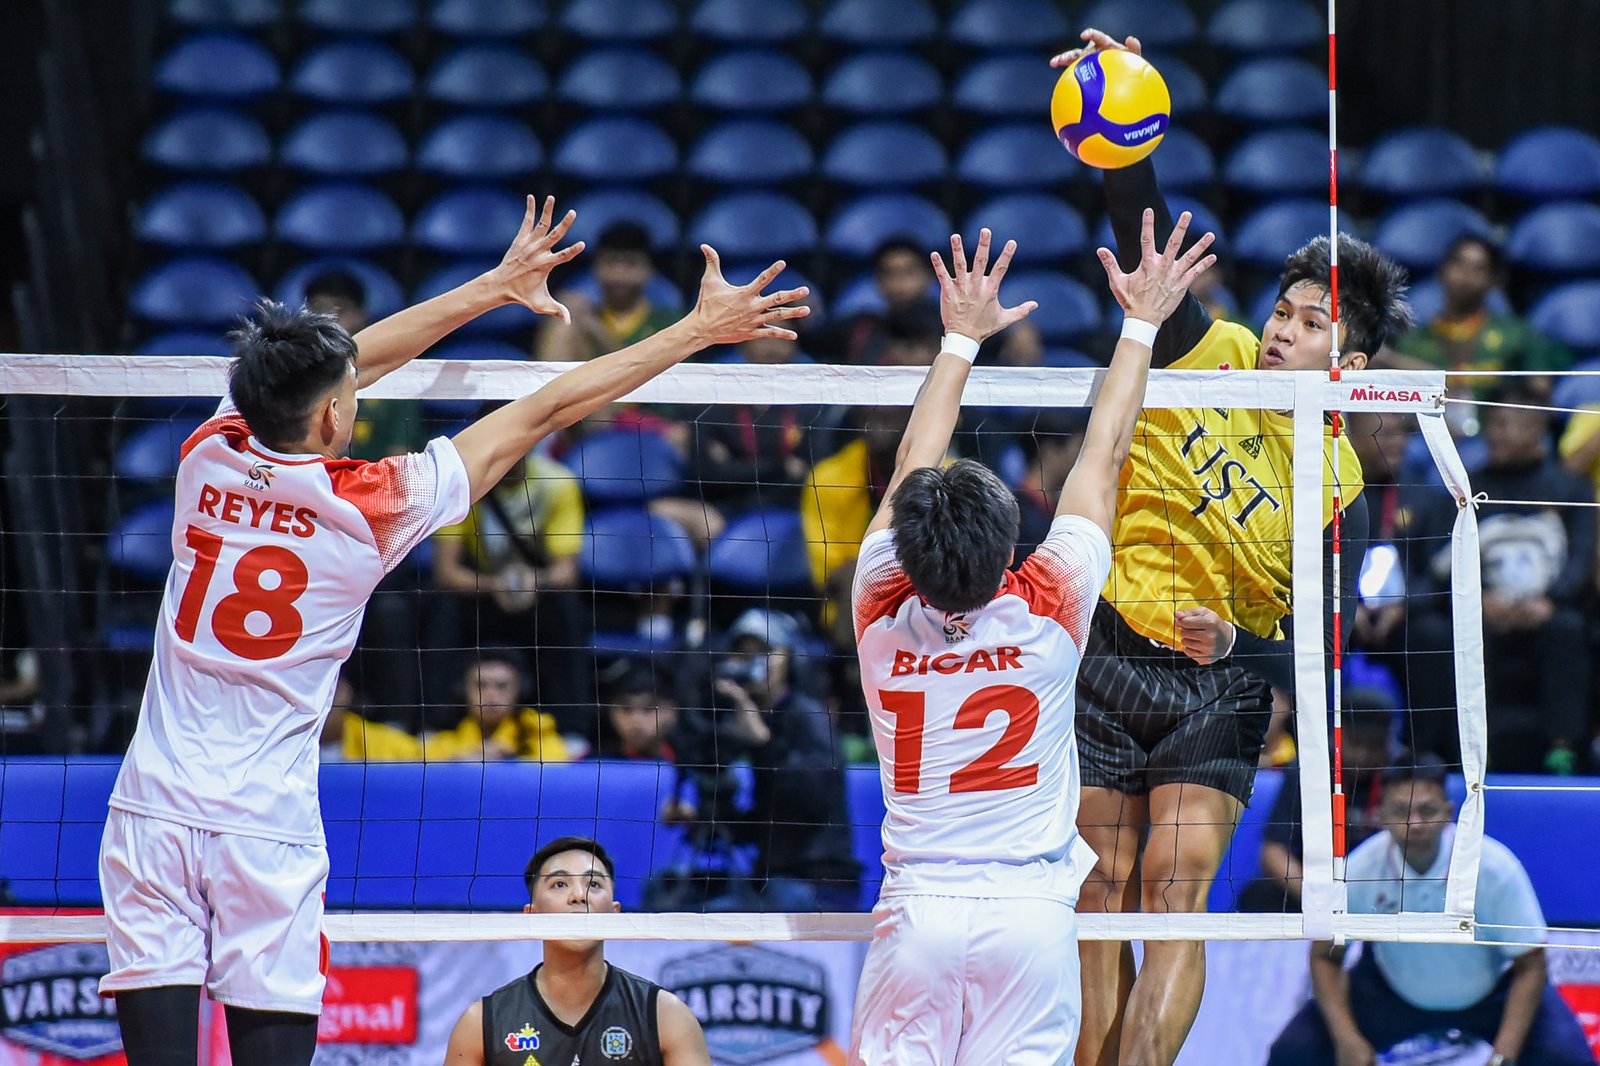 UAAP volleyball: UST Golden Spikers, FEU Tamaraws share early lead